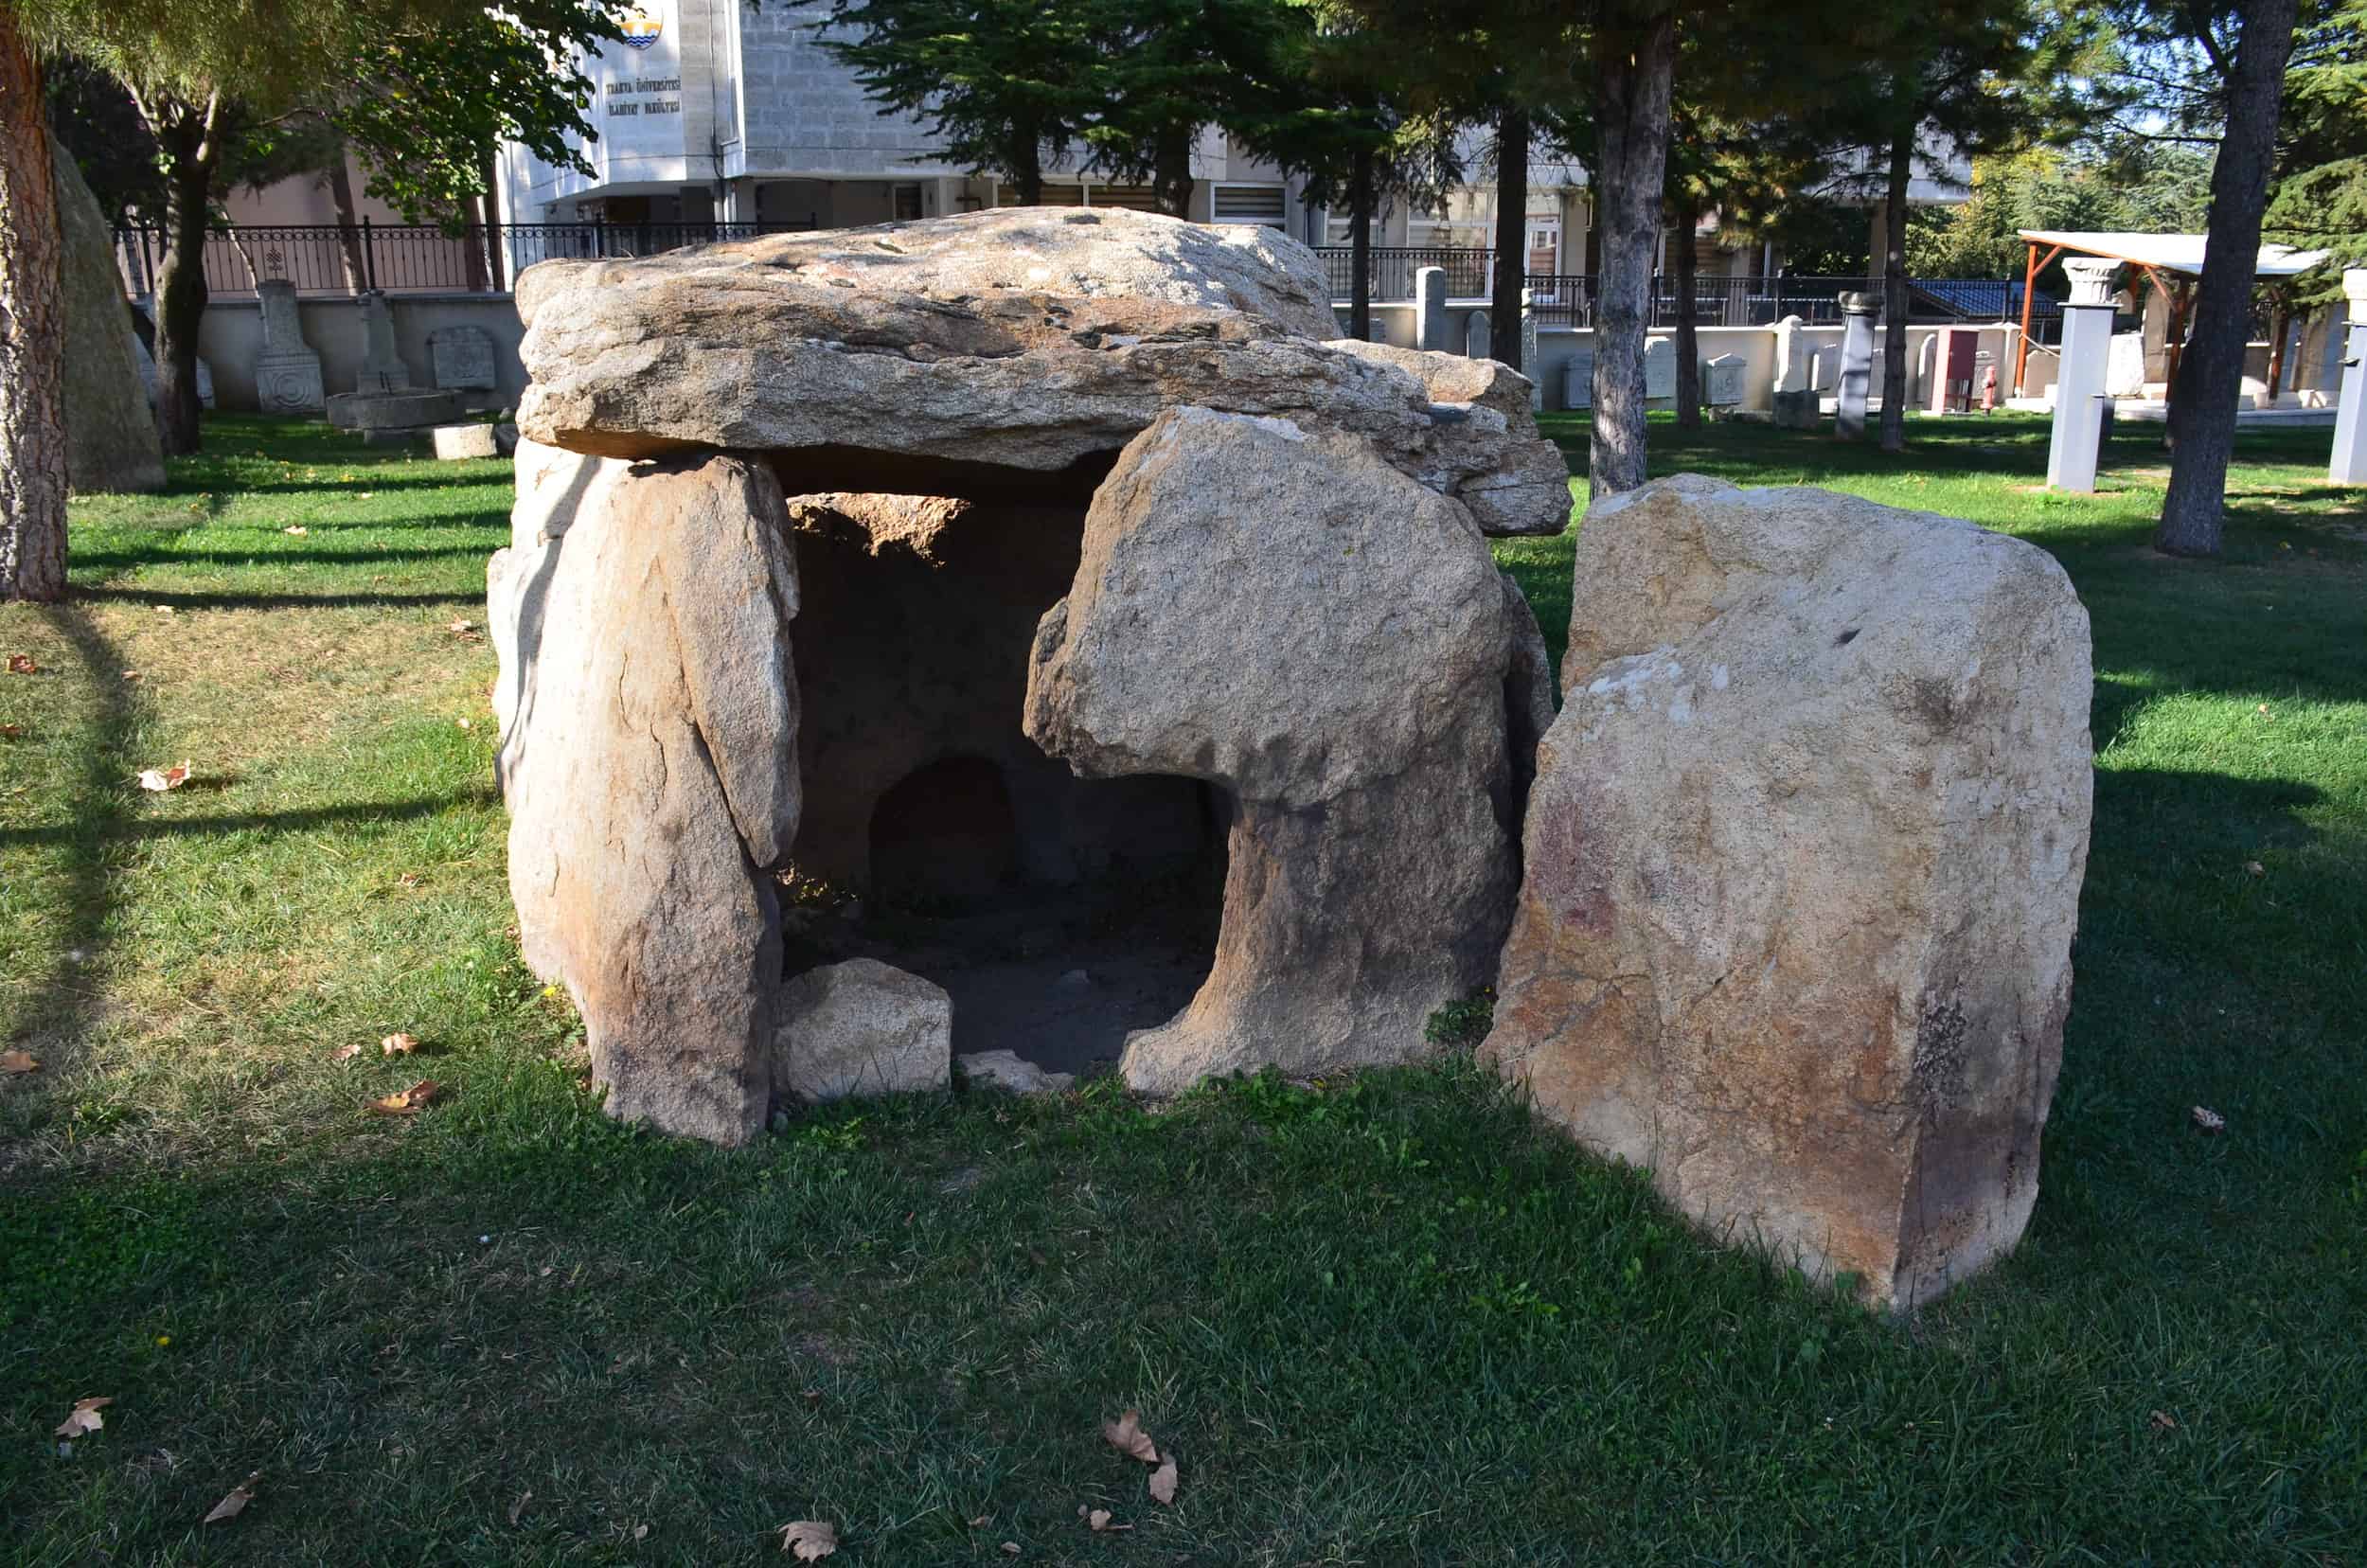 Dolmen at the Edirne Archaeology and Ethnography Museum in Edirne, Turkey